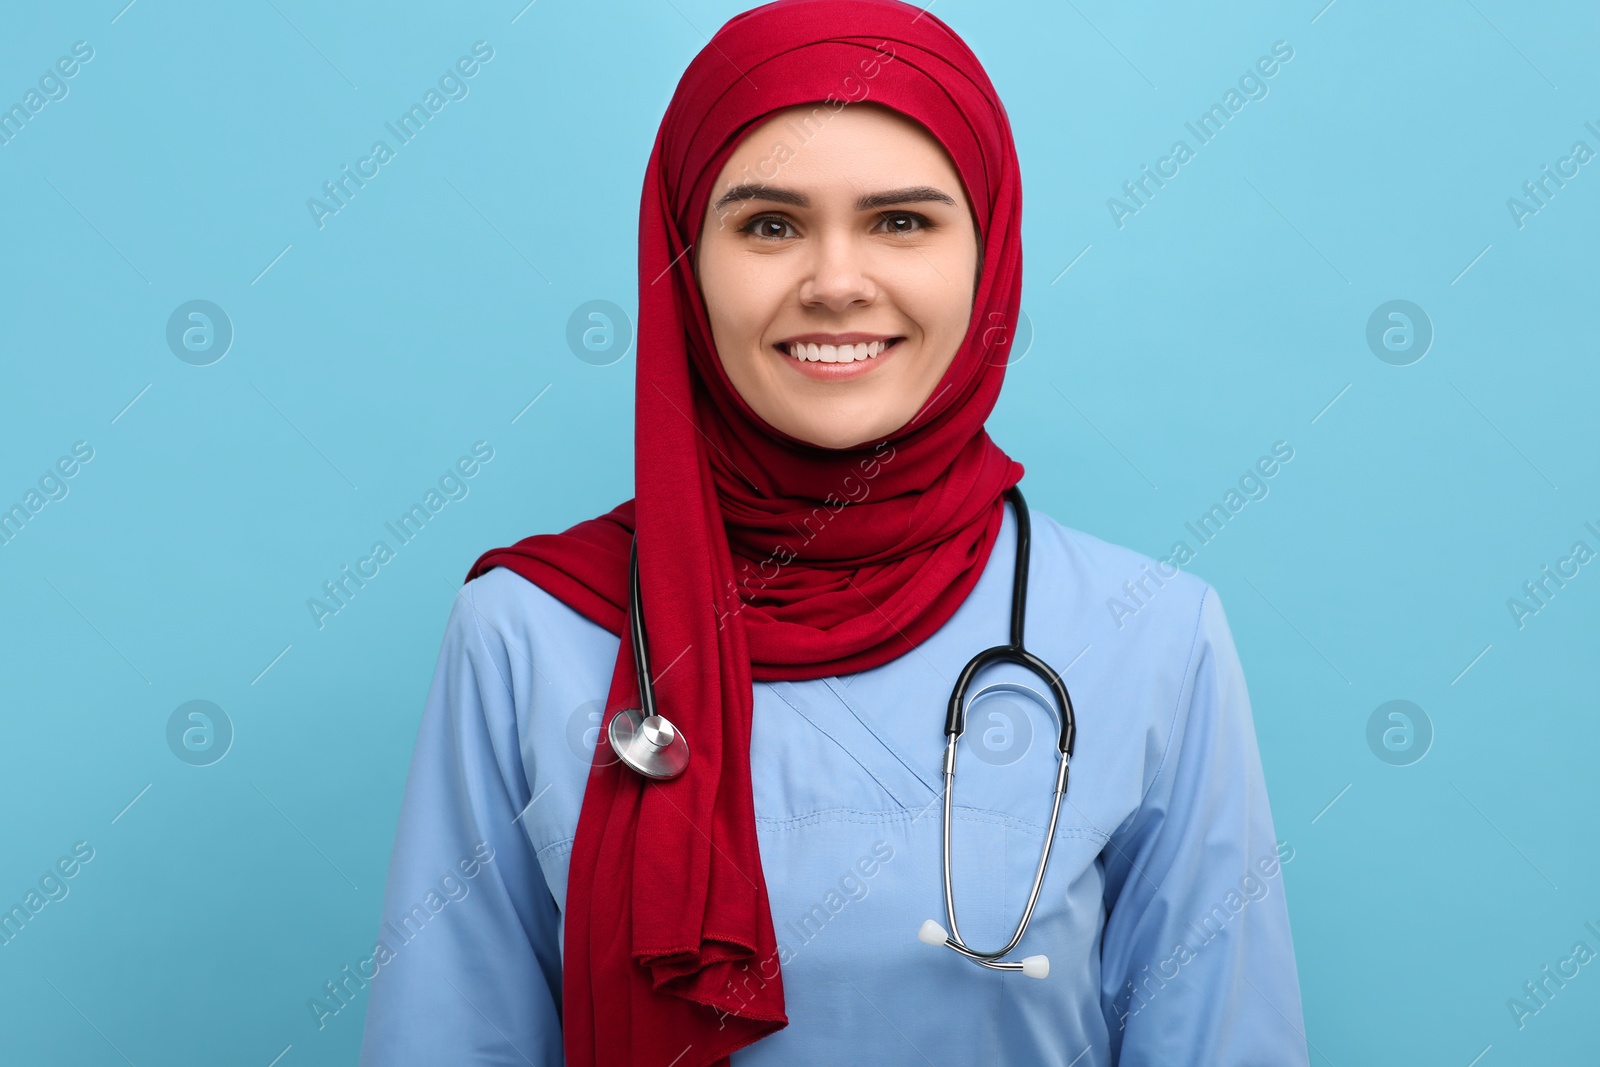 Photo of Muslim woman wearing hijab and medical uniform with stethoscope on light blue background